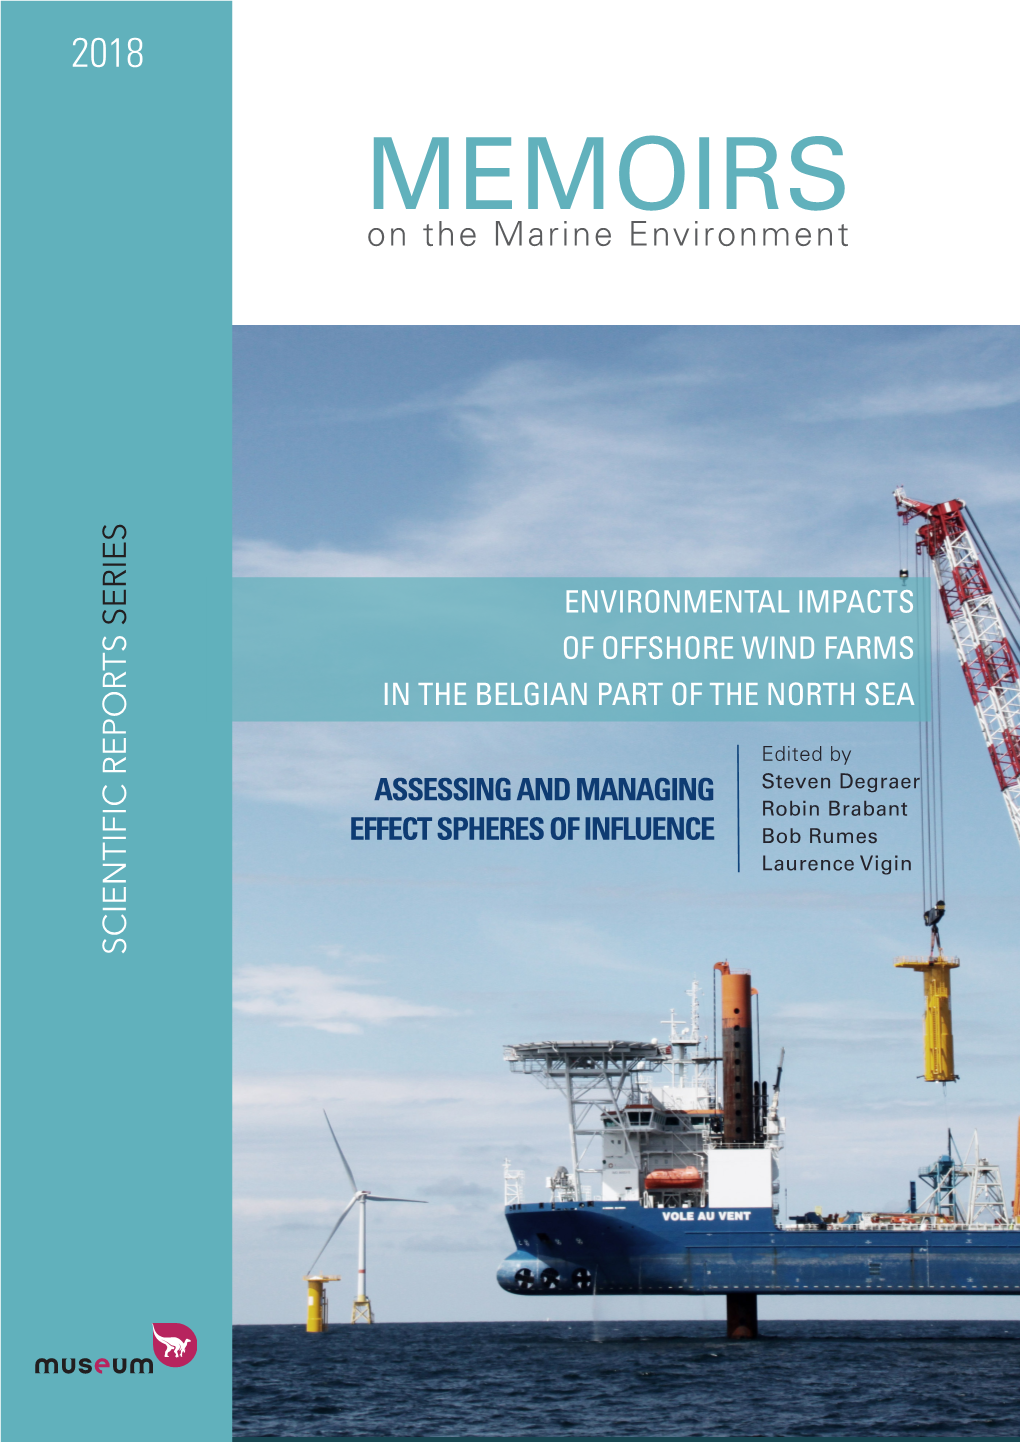 Environmental Impacts of Offshore Wind Farms in the Belgian Part of the North Sea